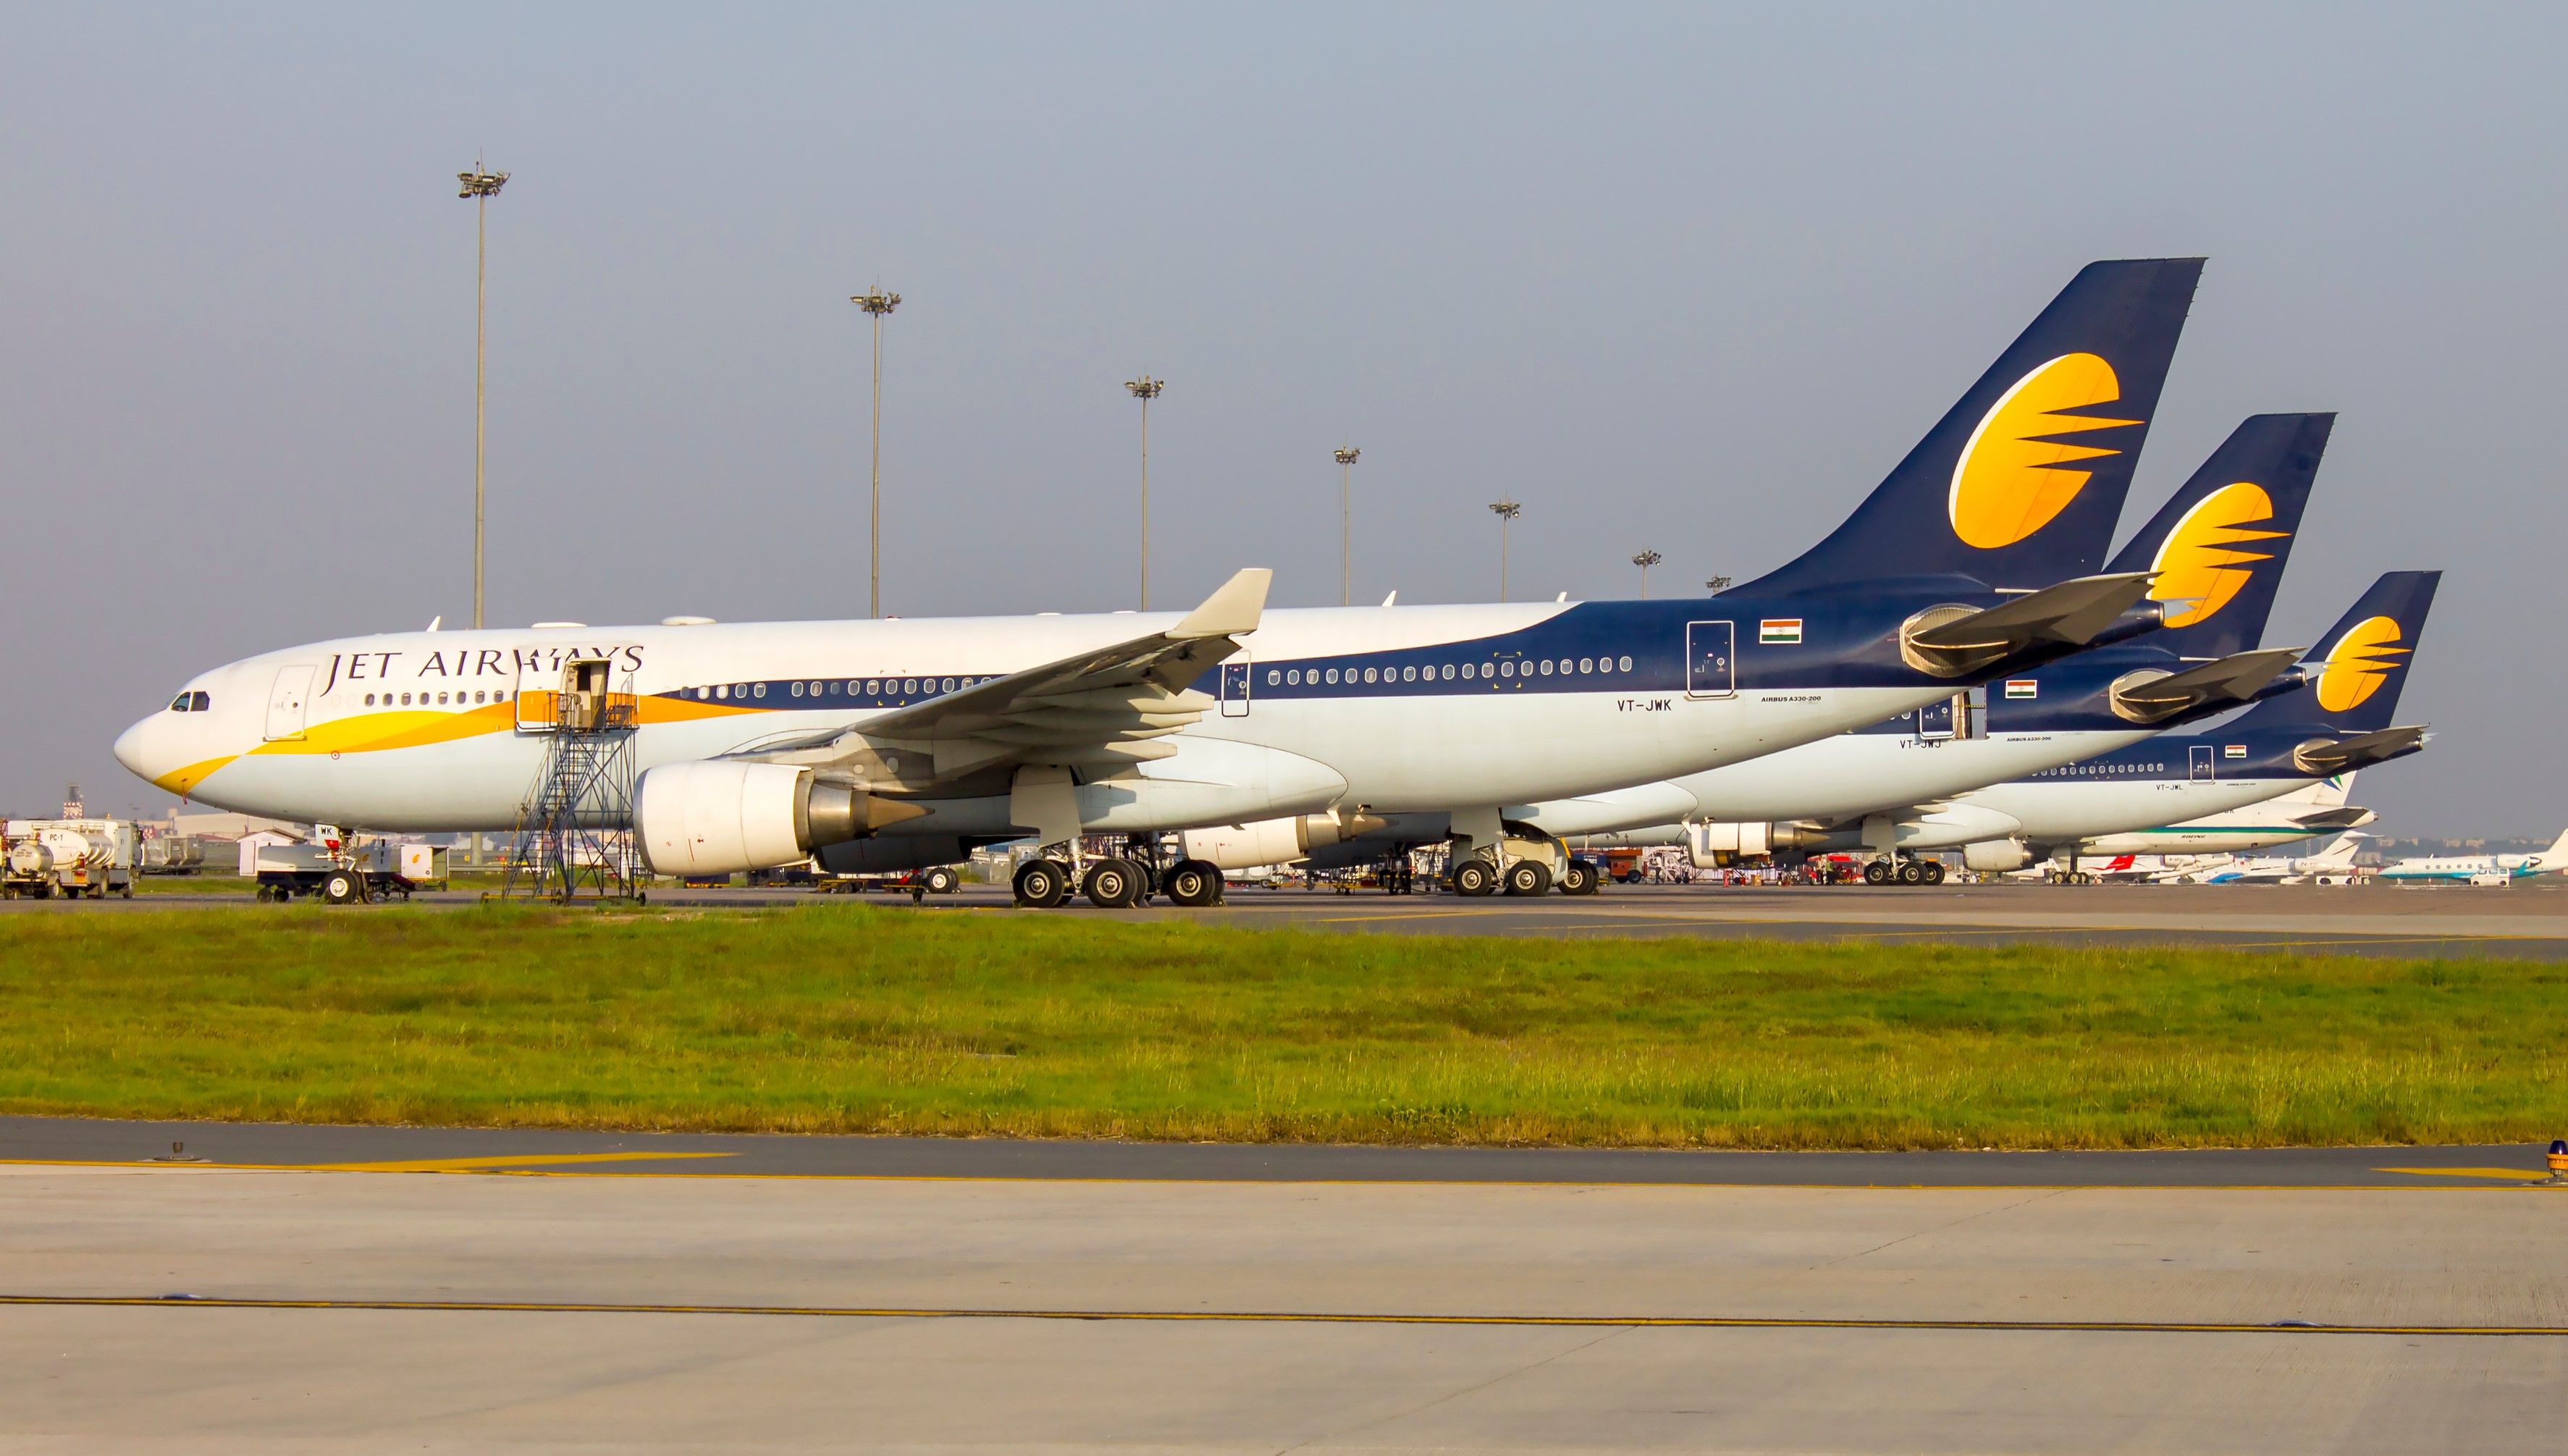 Jet Airways Airbus A330 planes parked at Delhi Airport